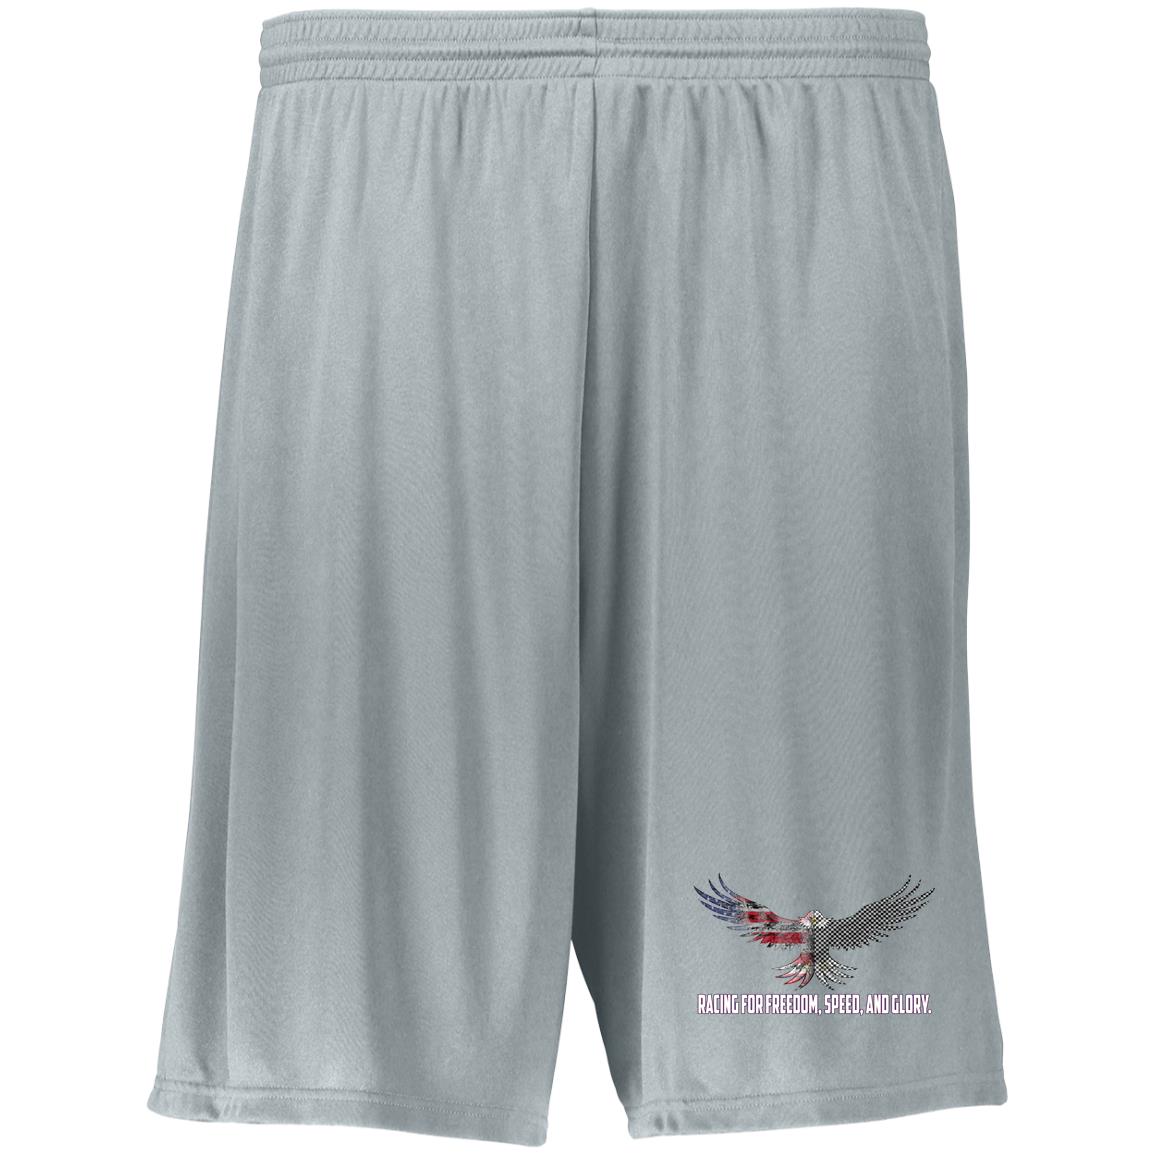 Racing For Freedom, Speed, And Glory Moisture-Wicking 9 inch Inseam Training Shorts